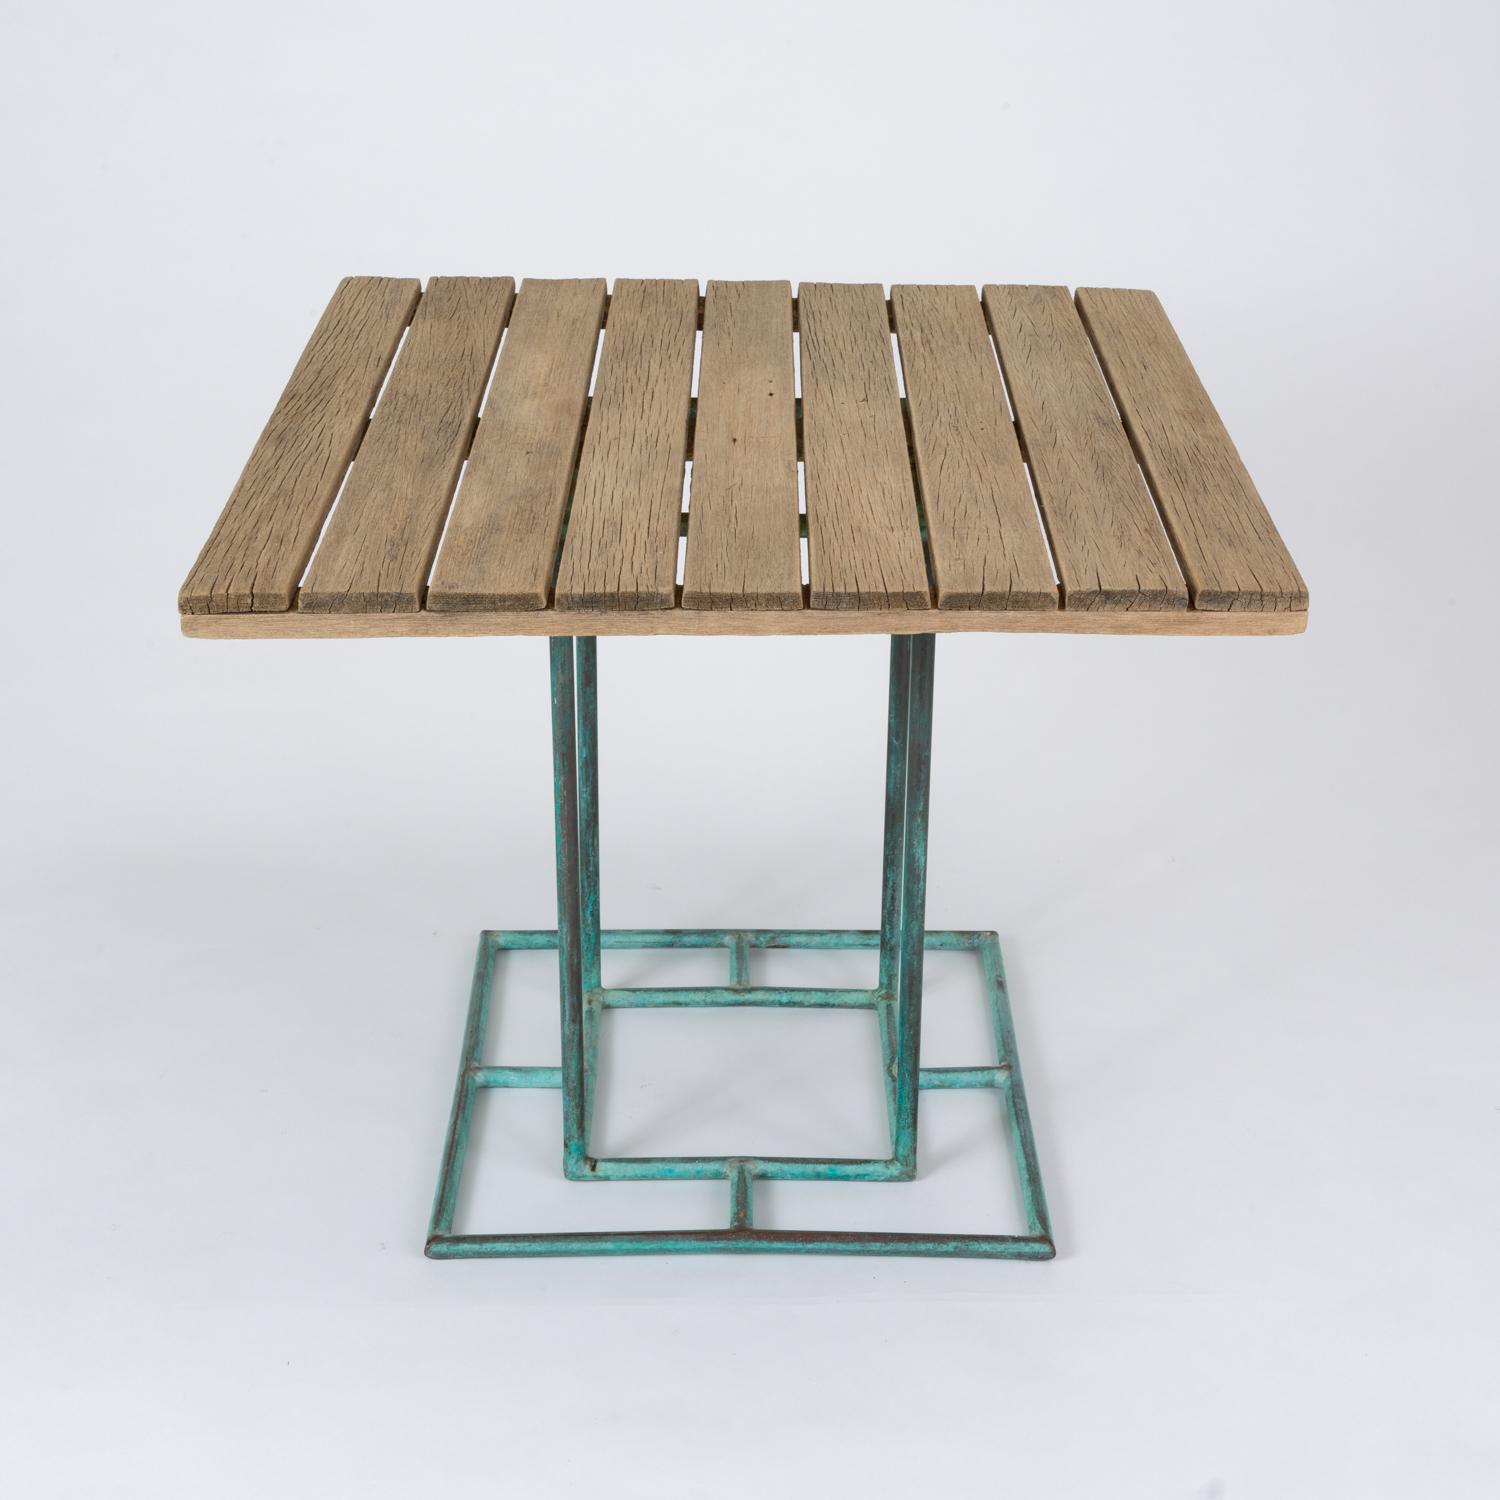 Bronze Patio Dining Table with Square Wooden Top by Walter Lamb for Brown Jordan 1